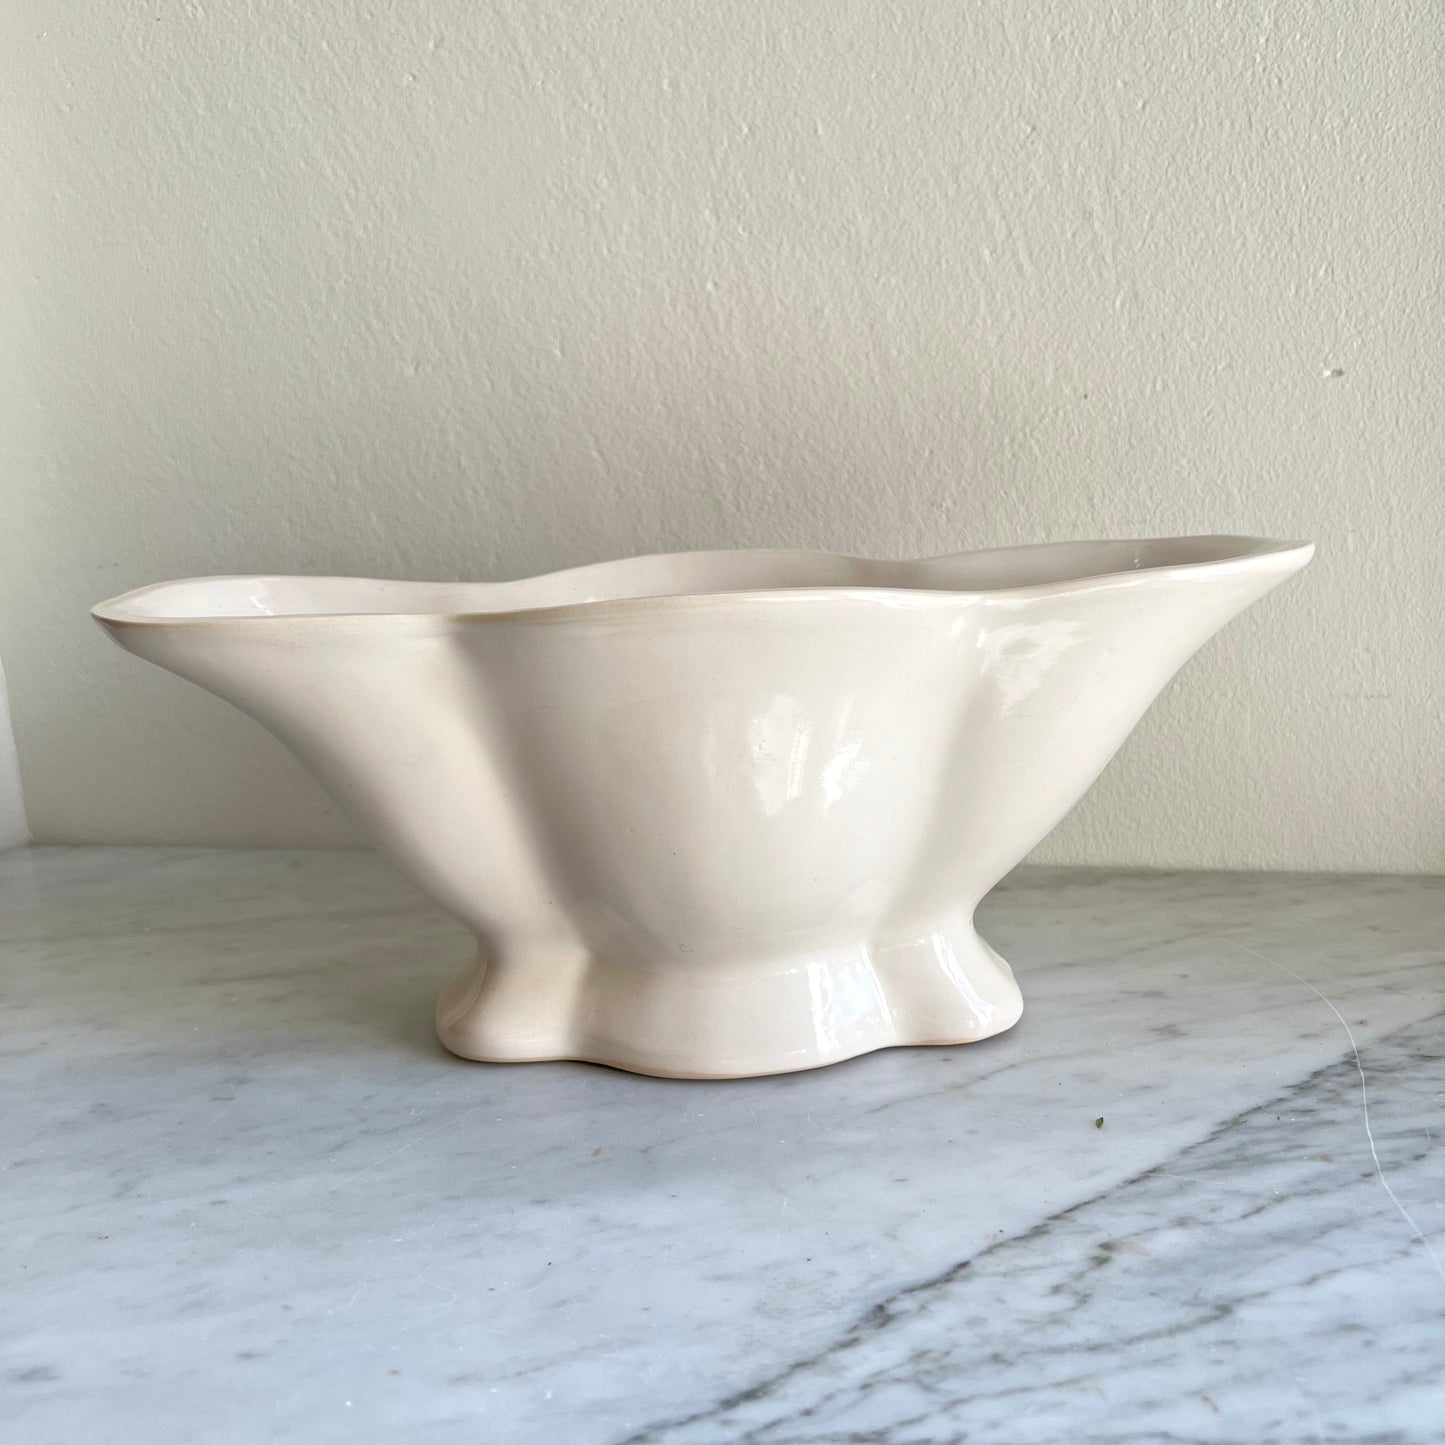 Fulham Pottery Charles West Art Deco Mantle Vase, Made in England